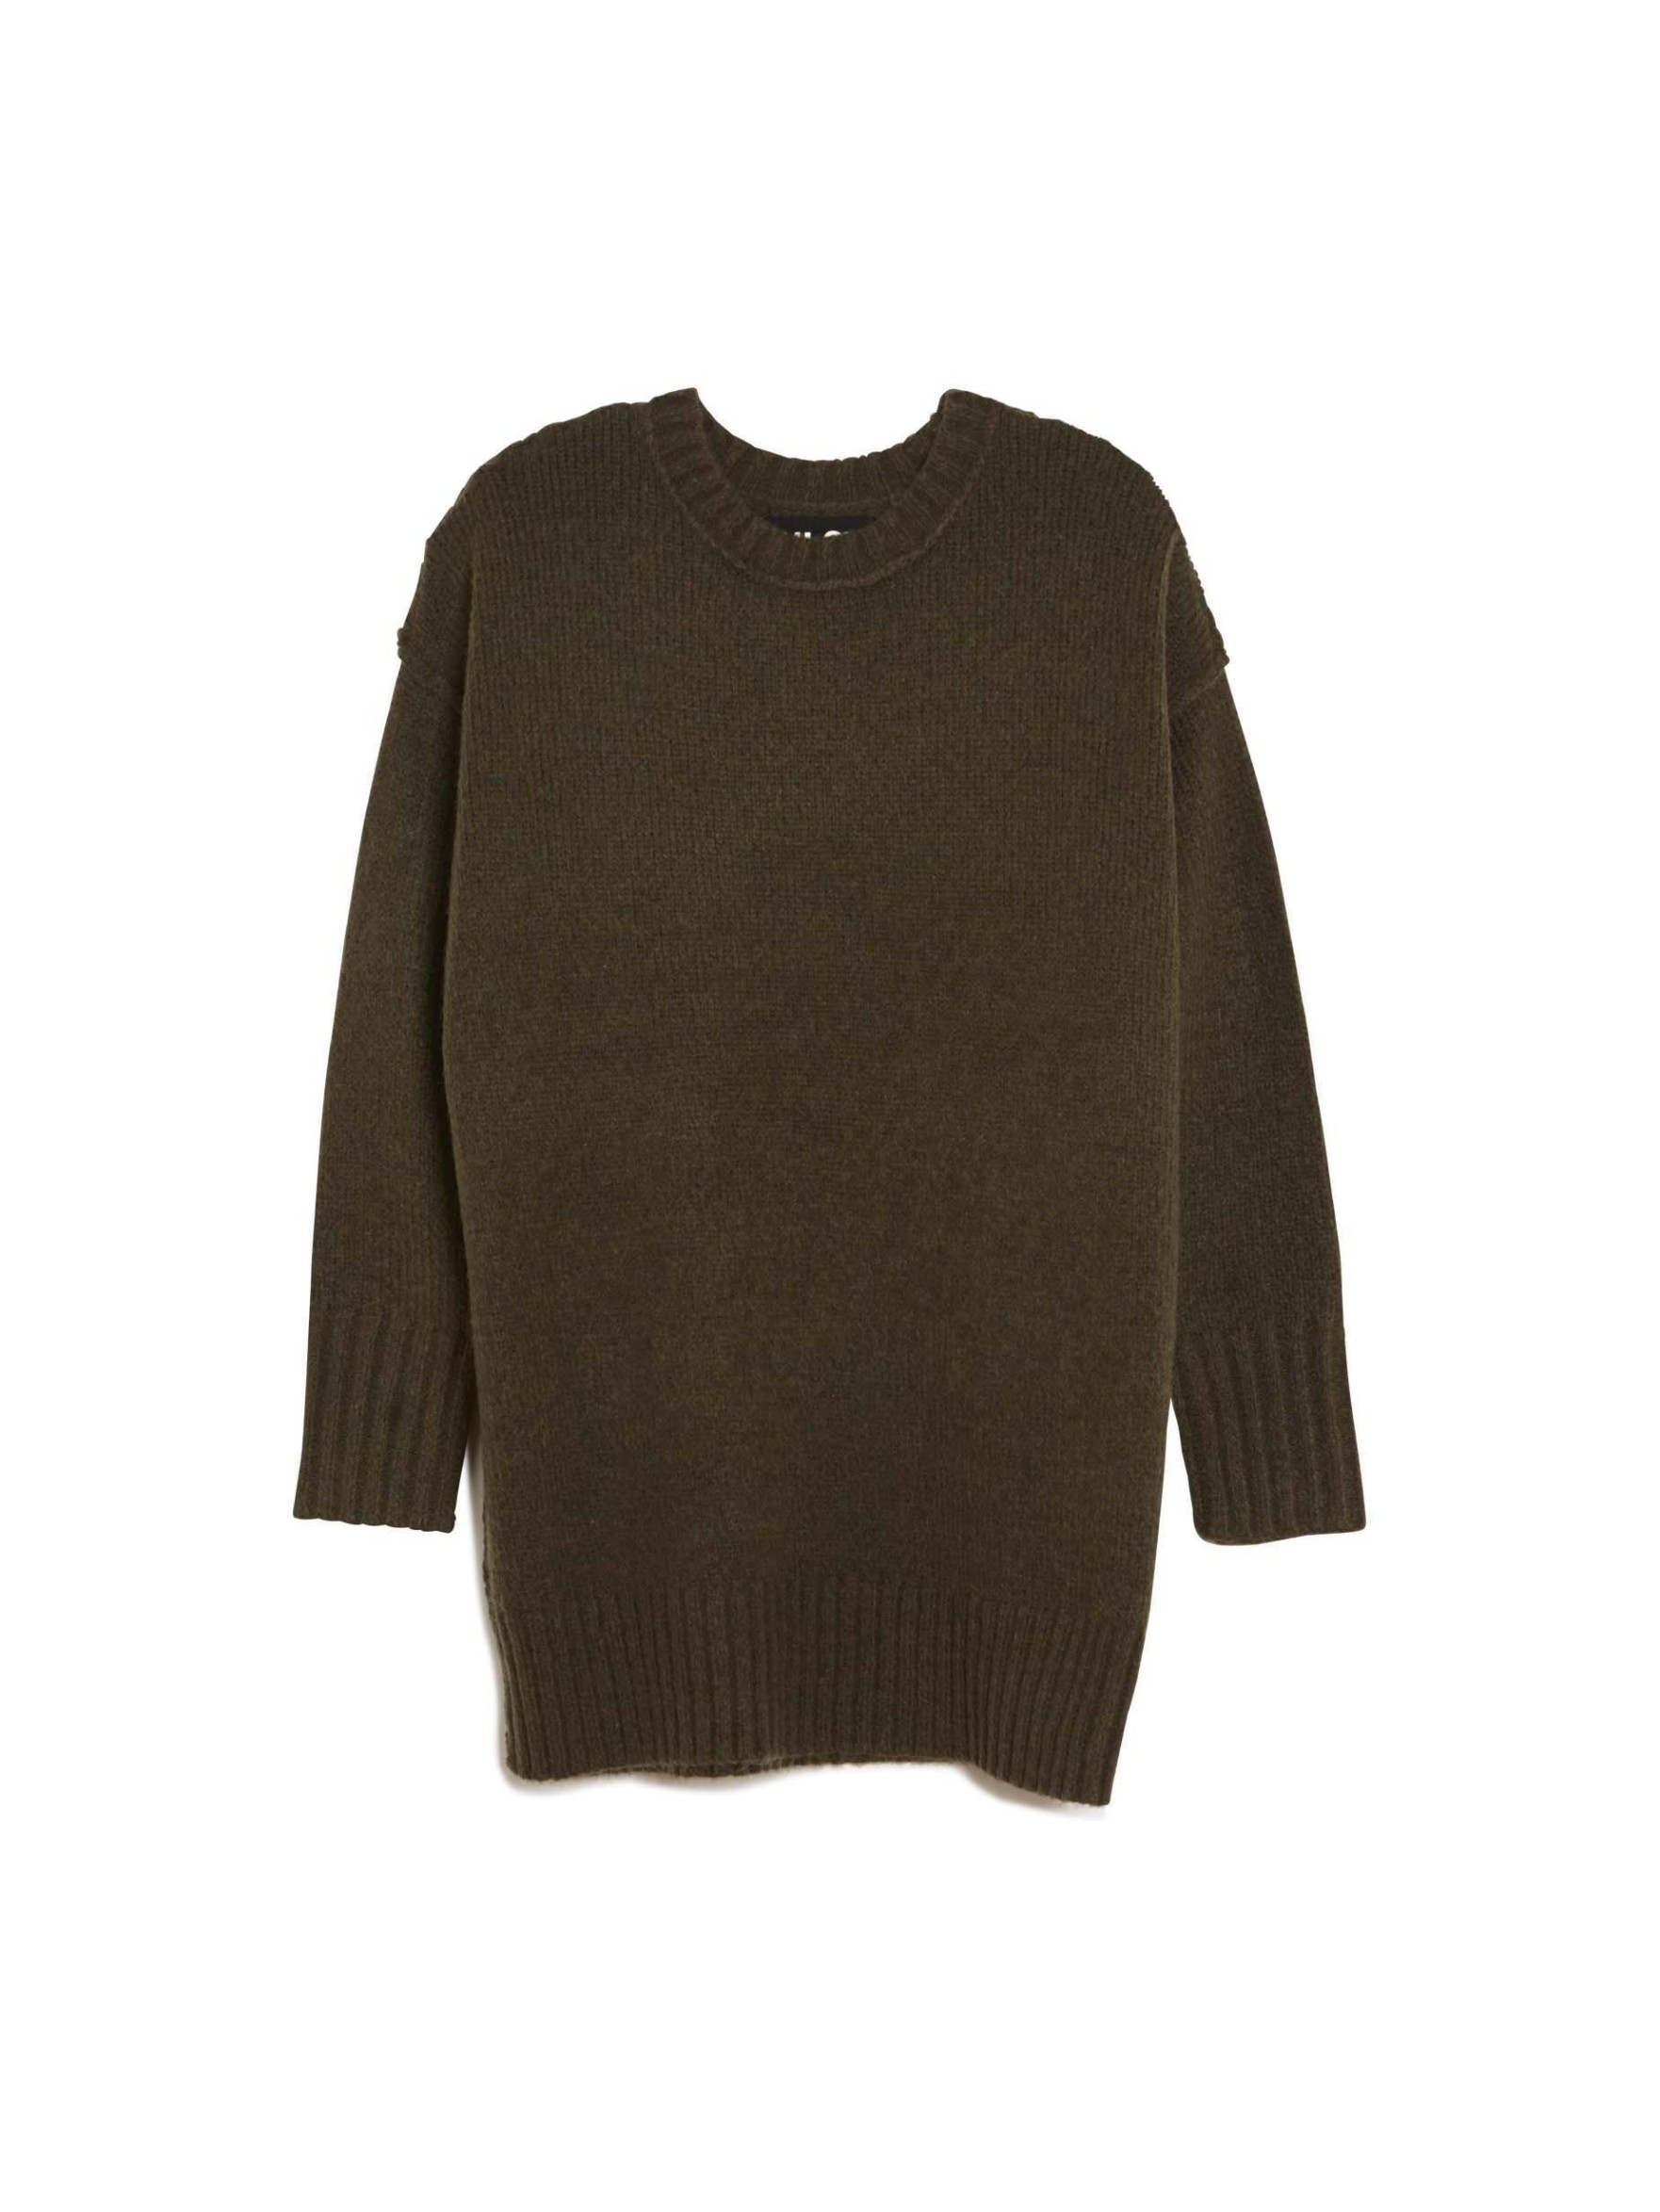 Nlst Oversize Crew Neck Sweater in Green (Olive Drab) | Lyst